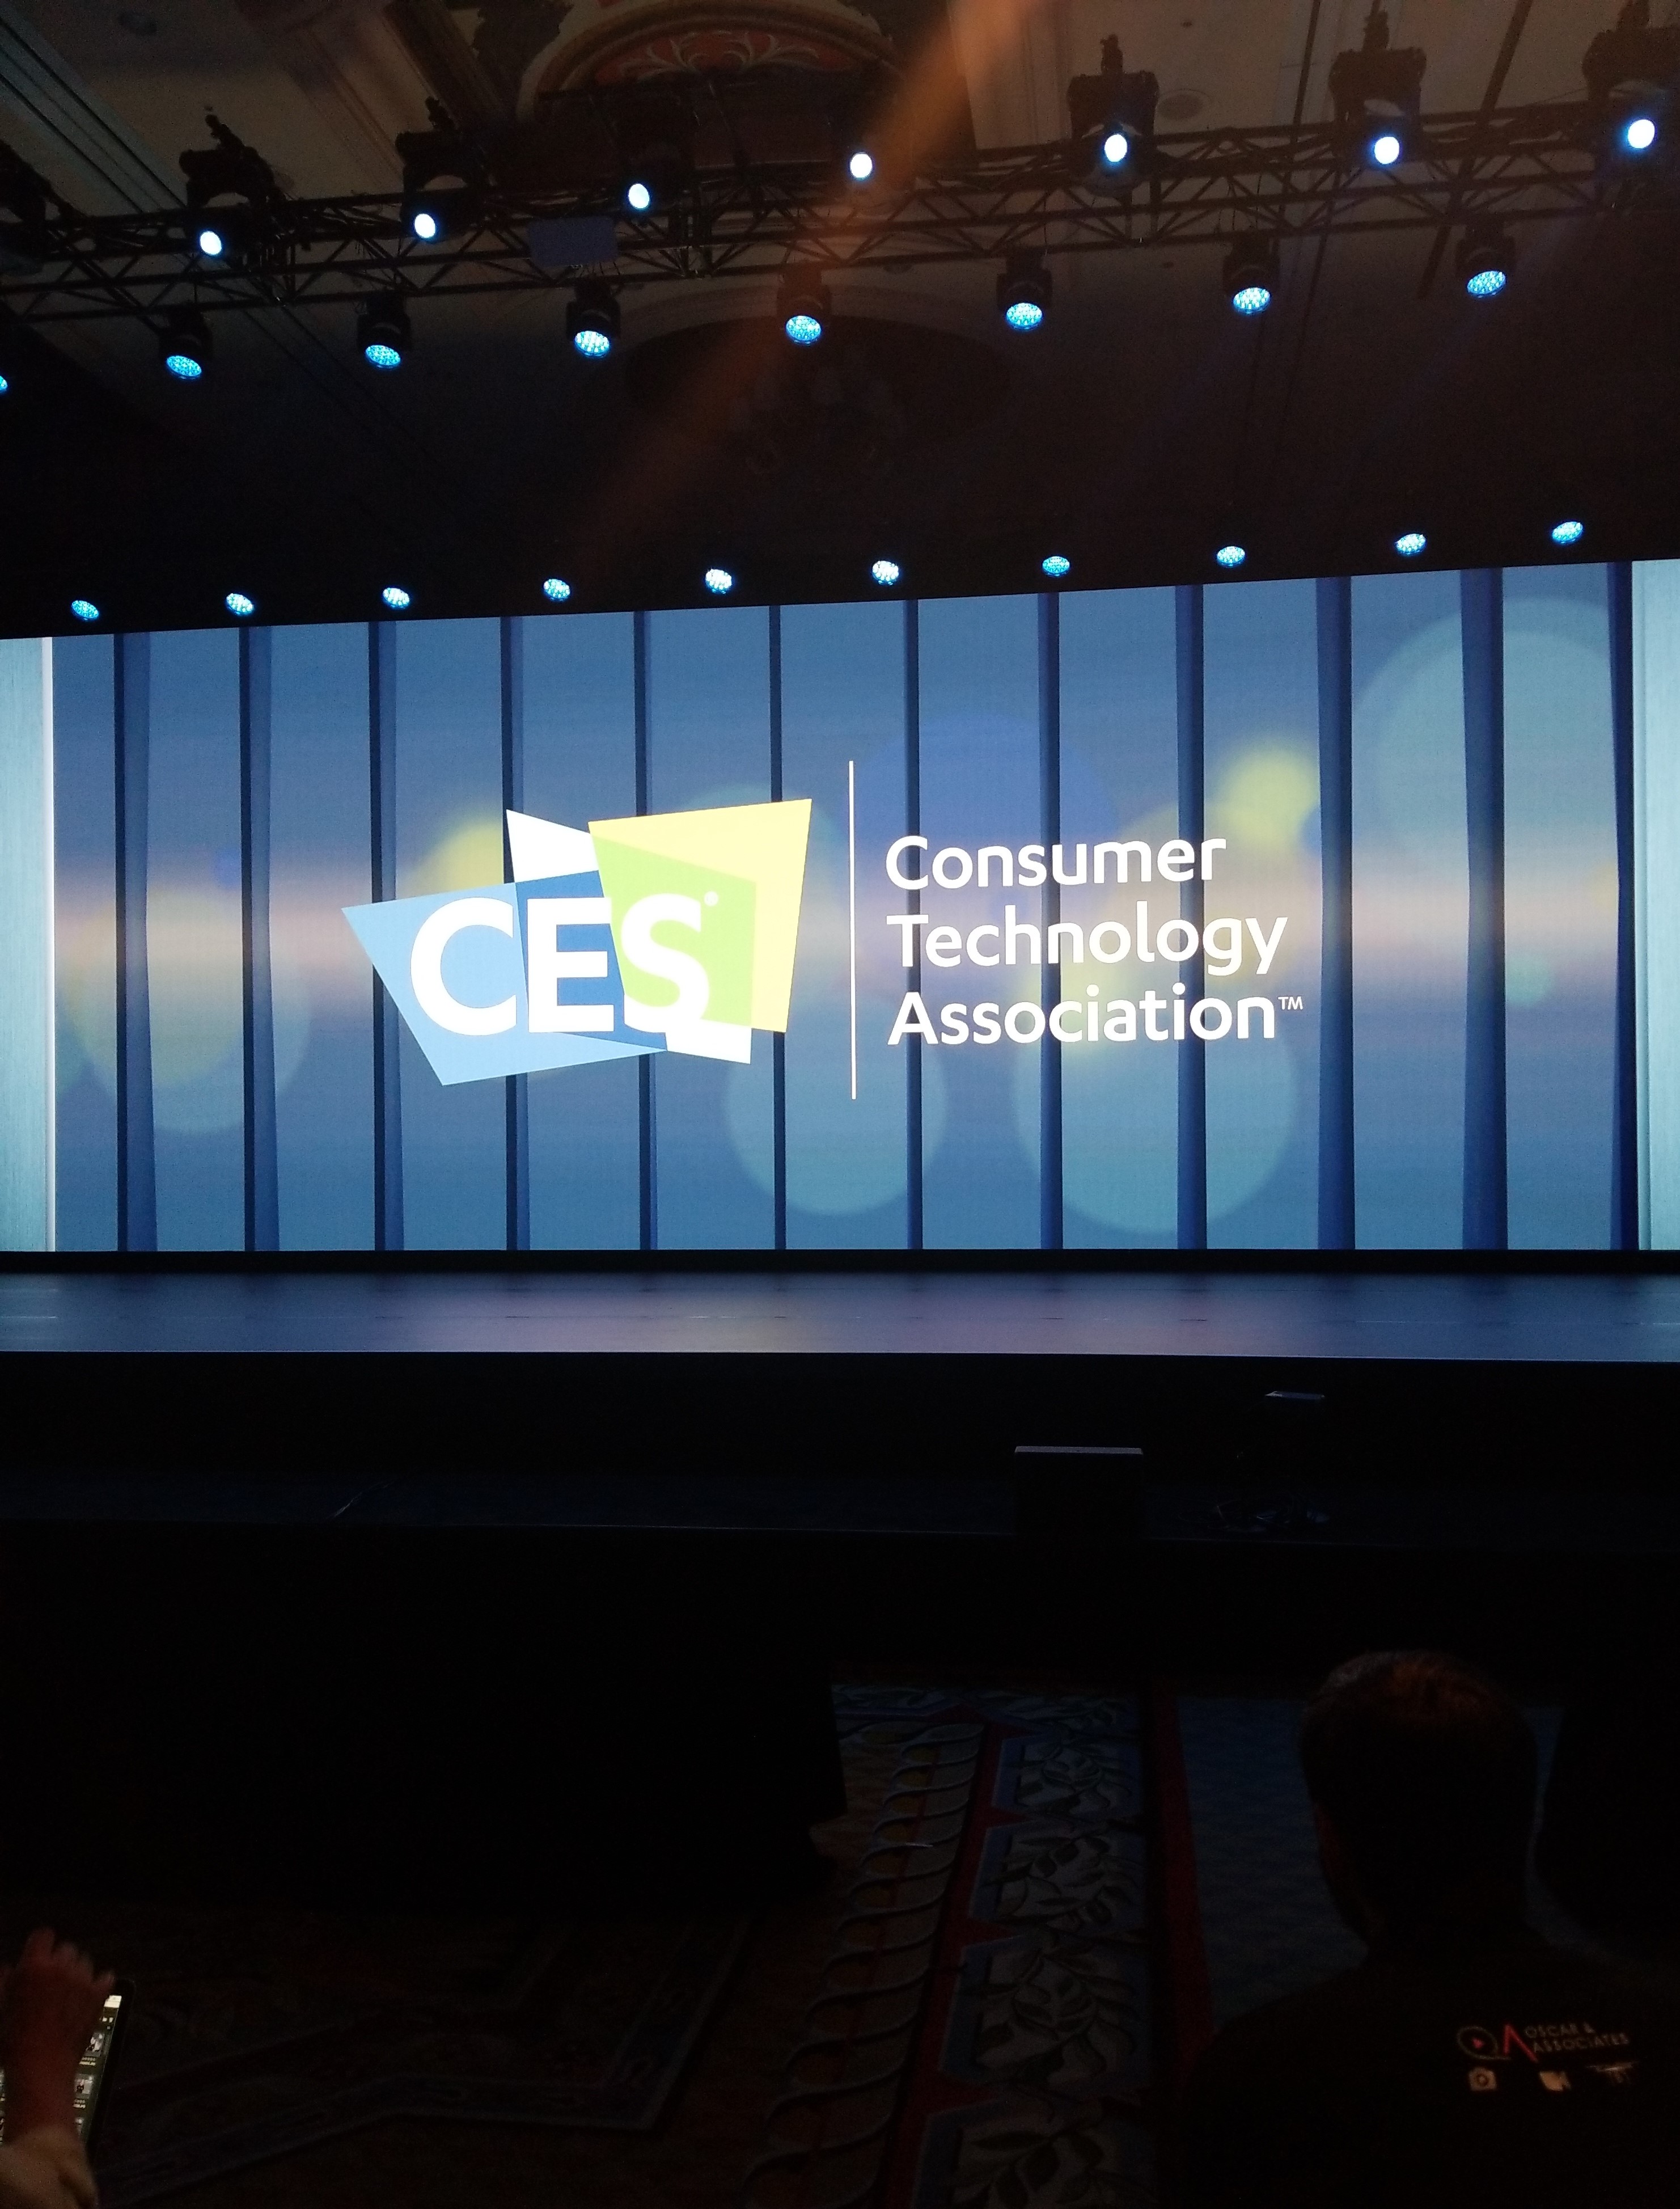 Cover image for  article: CES 2020 Was a Wonderful (And Frightening) Harbinger of the Future - Part 1